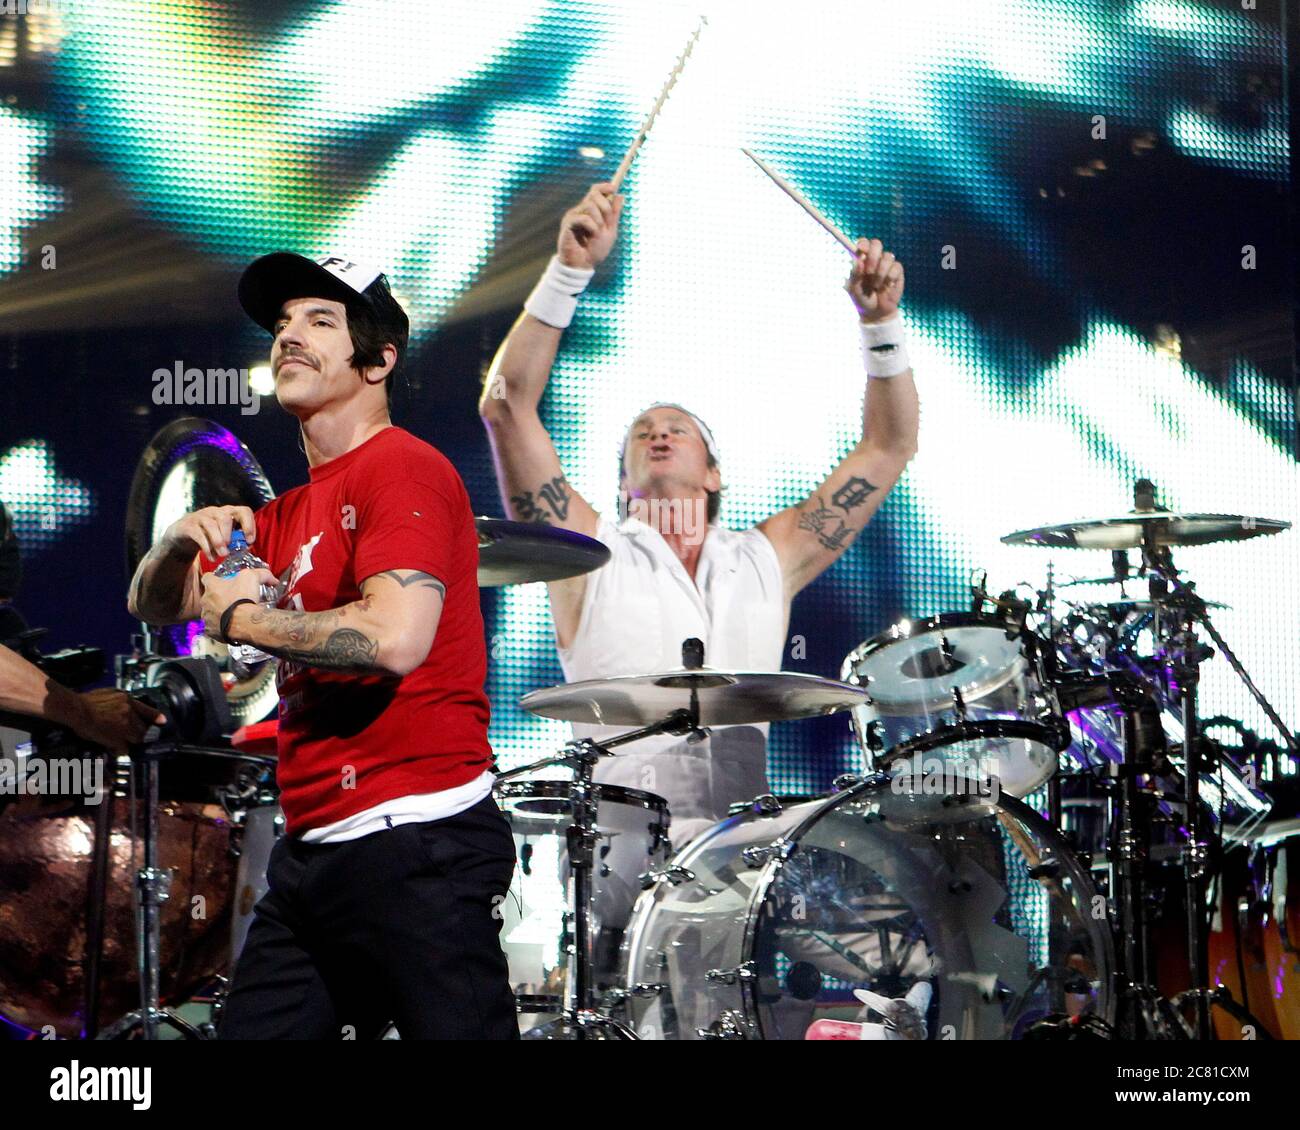 Red Hot Chili Pepper lead singer Anthony Kiedis performs with the rest of the band at the BankAtlantic Center near Fort Lauderdale, Florida. Stock Photo